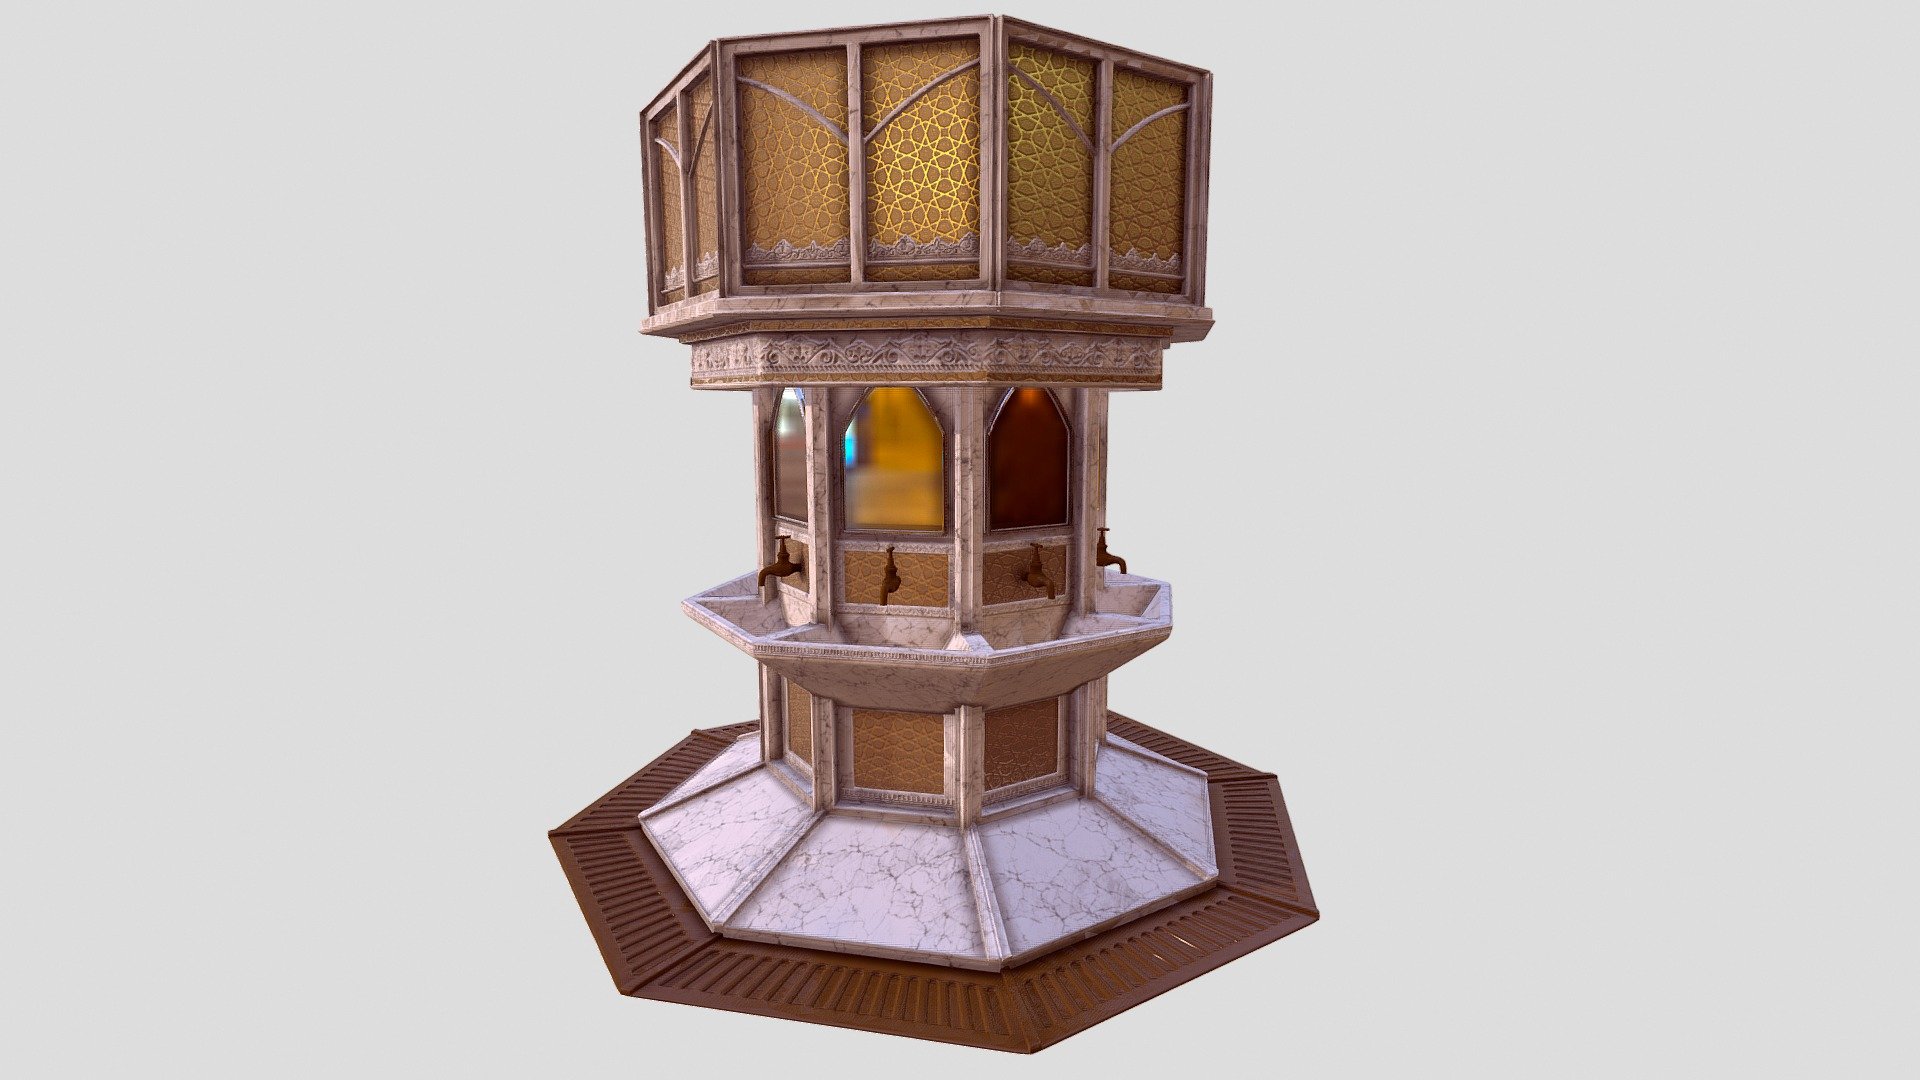 Model made in Blender for illustration purposes. Comes with original Blender file including editable modifiers, and as an .OBJ and .FBX.

Inspired by the sink in &ldquo;Chamber of Secrets